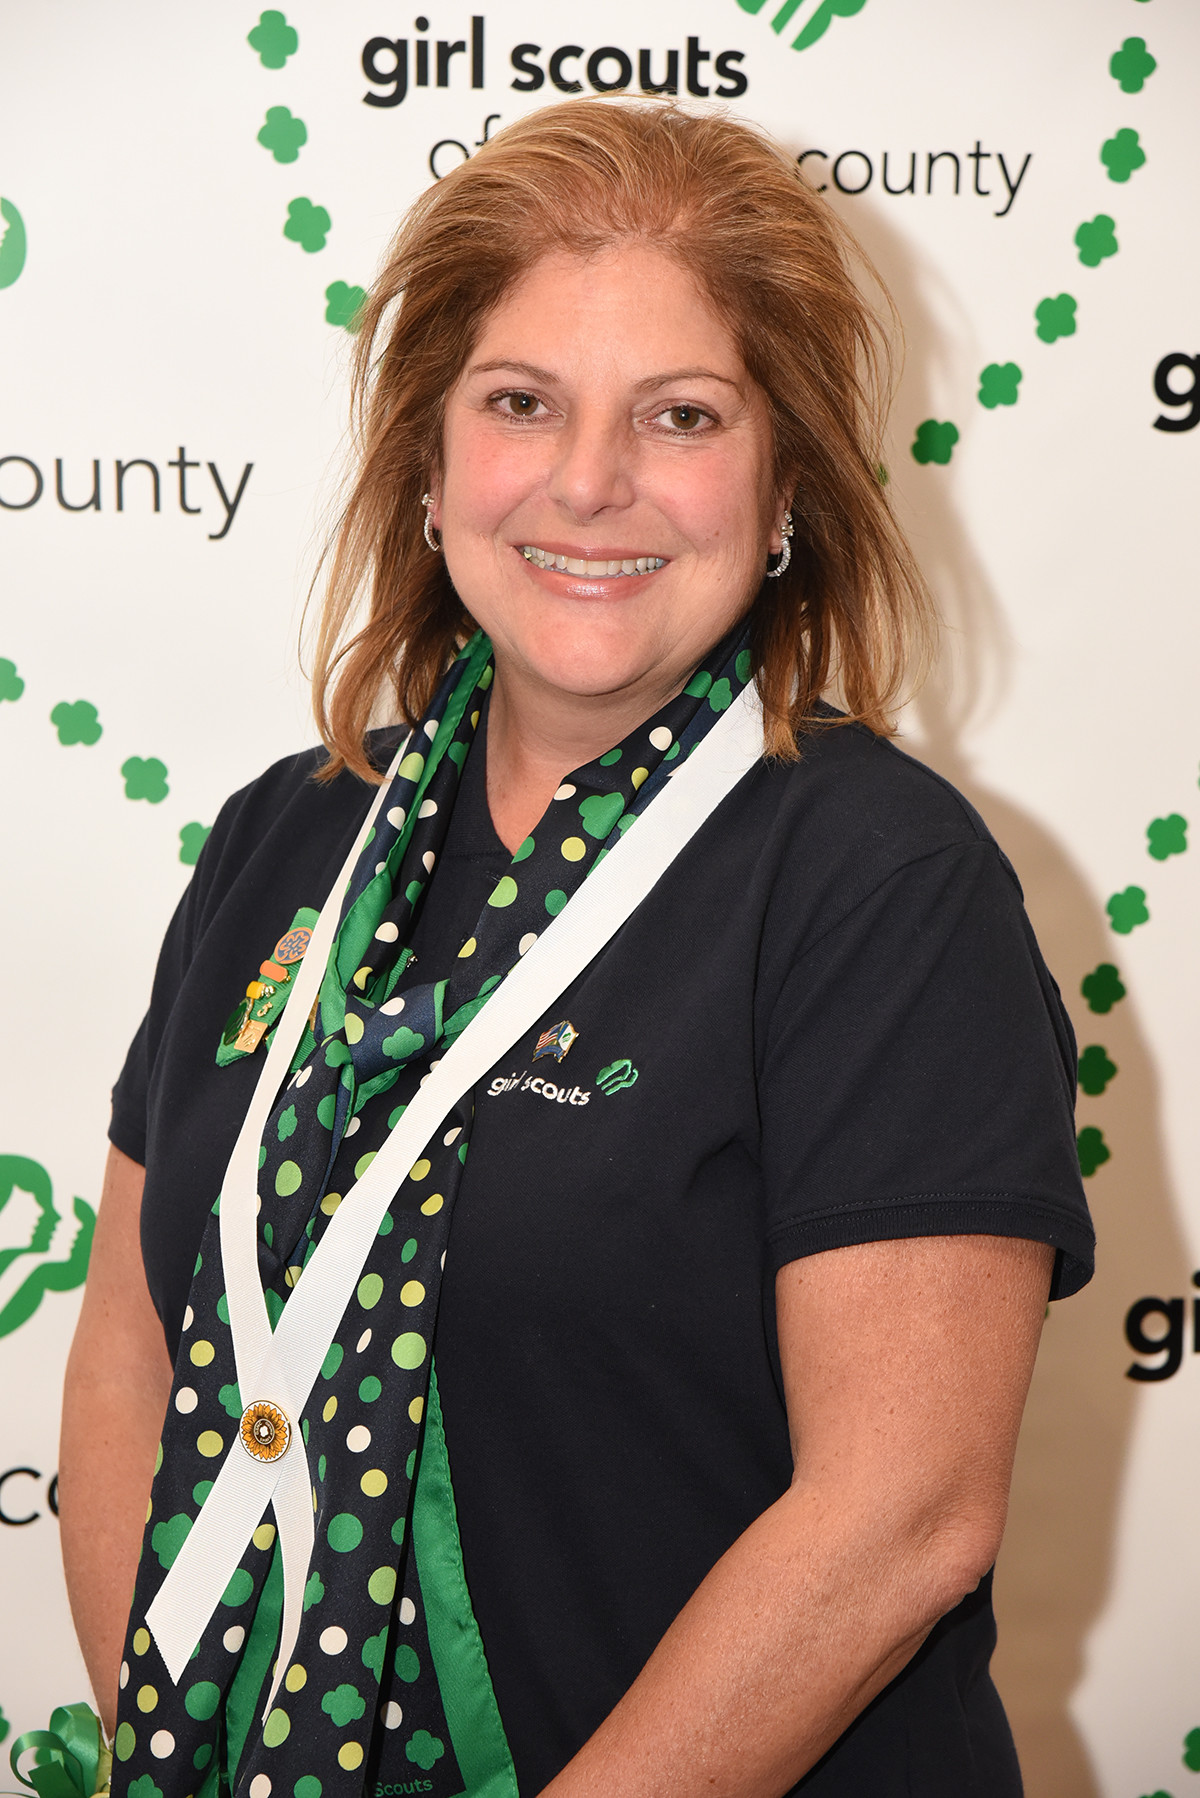 Valley Stream Girl Scouts leader Liz Stevens was honored for her lifelong achievements with the Girl Scouts.